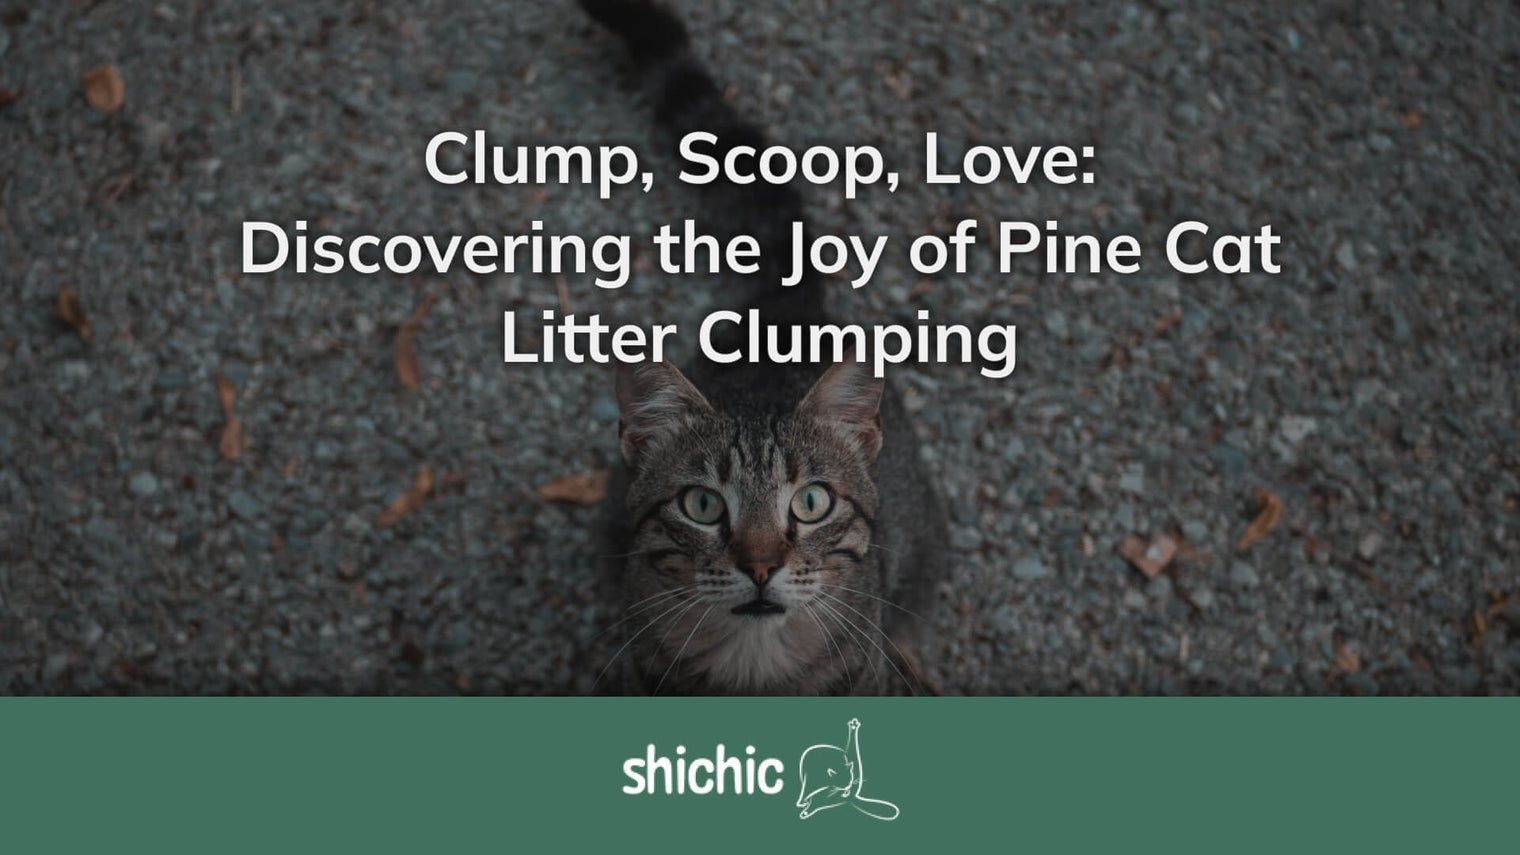 Clump, Scoop, Love: Discovering the Joy of Pine Cat Litter Clumping - Shichic